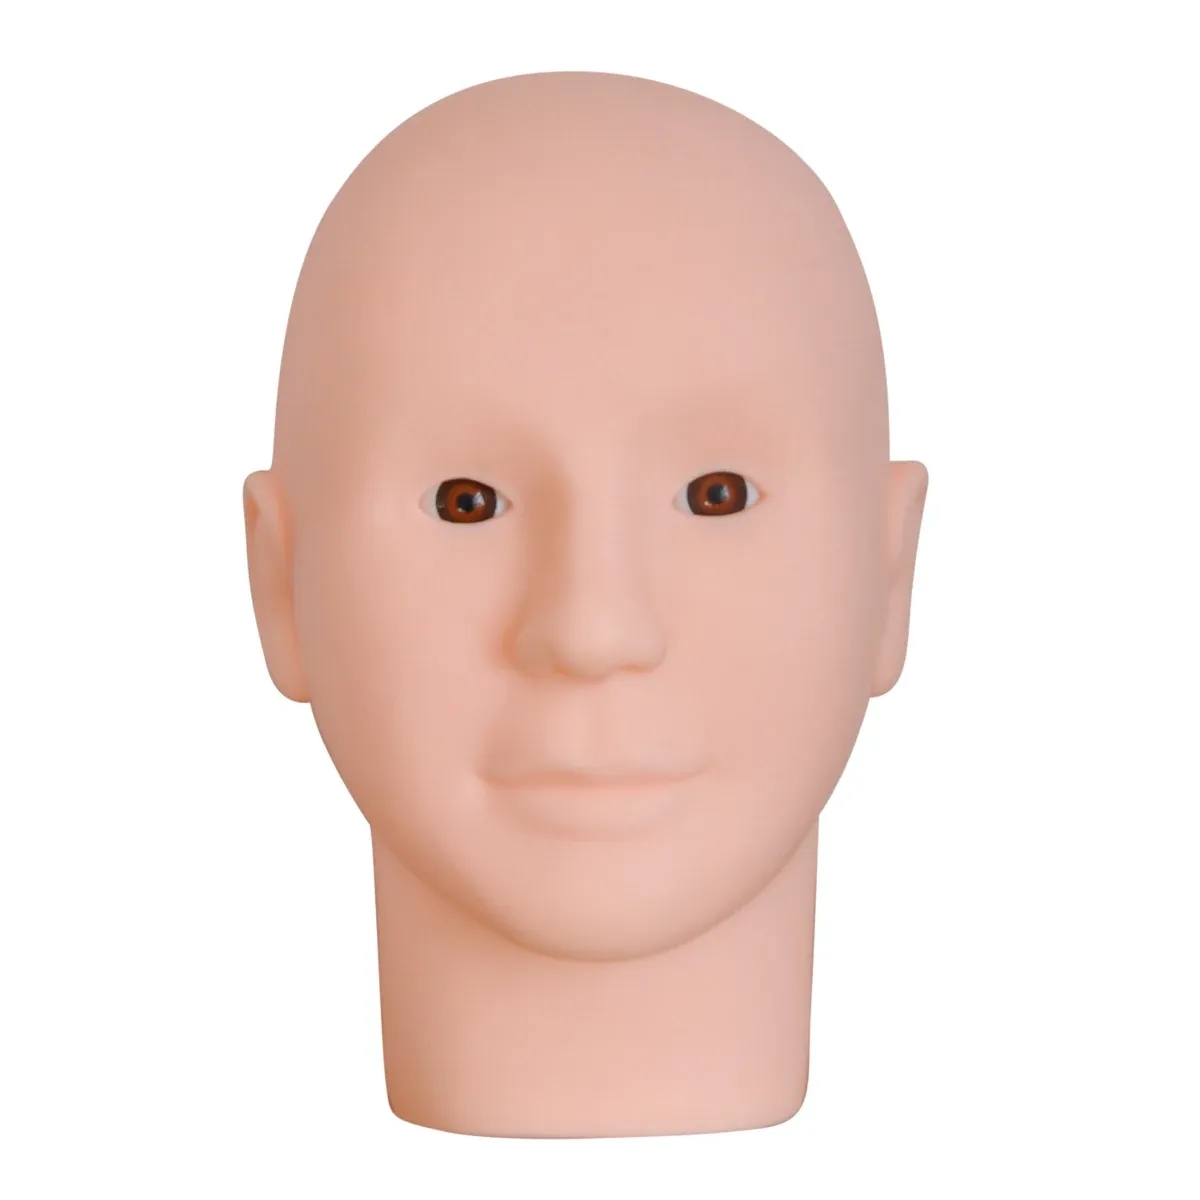 accesories Training Head Rubber Cosmetology Mannequin Doll Face Head For Eyelashes Makeup Massage Practice